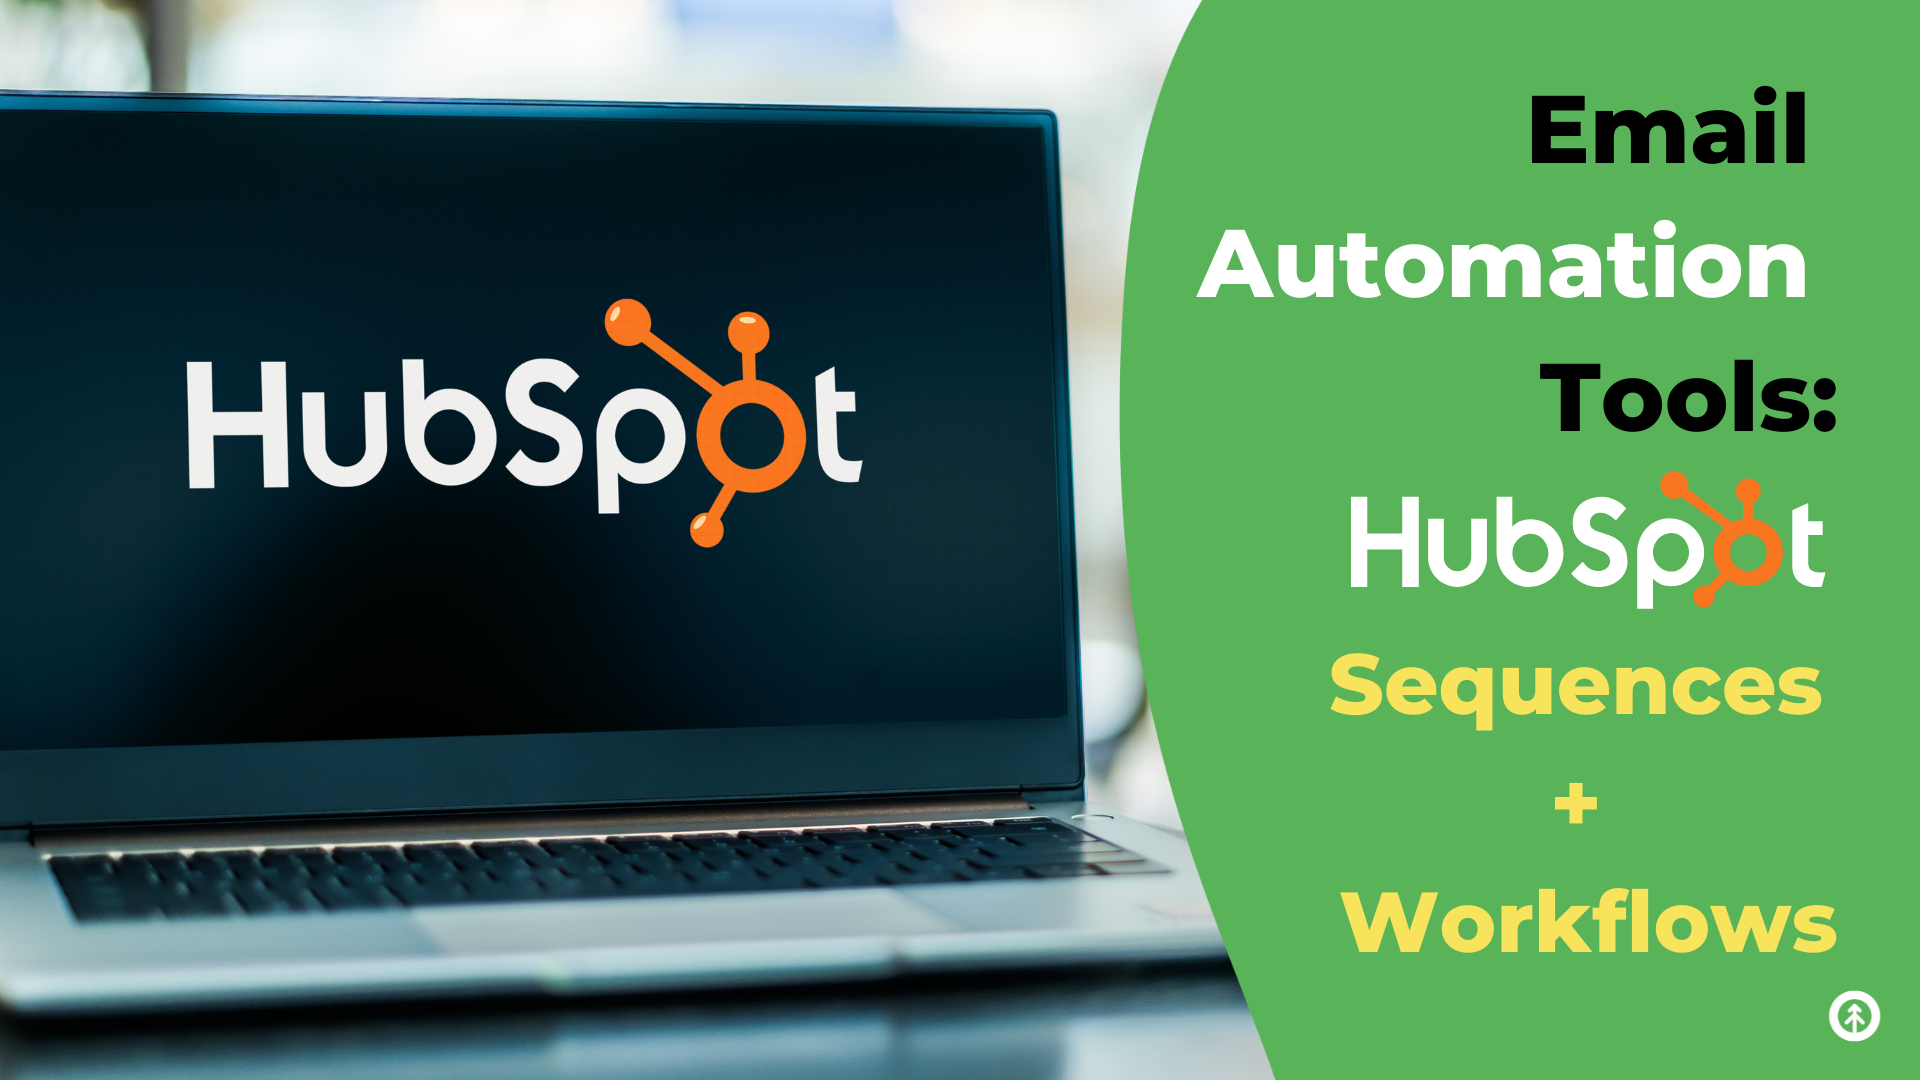 Email Automation Tools: HubSpot Sequences + Workflows